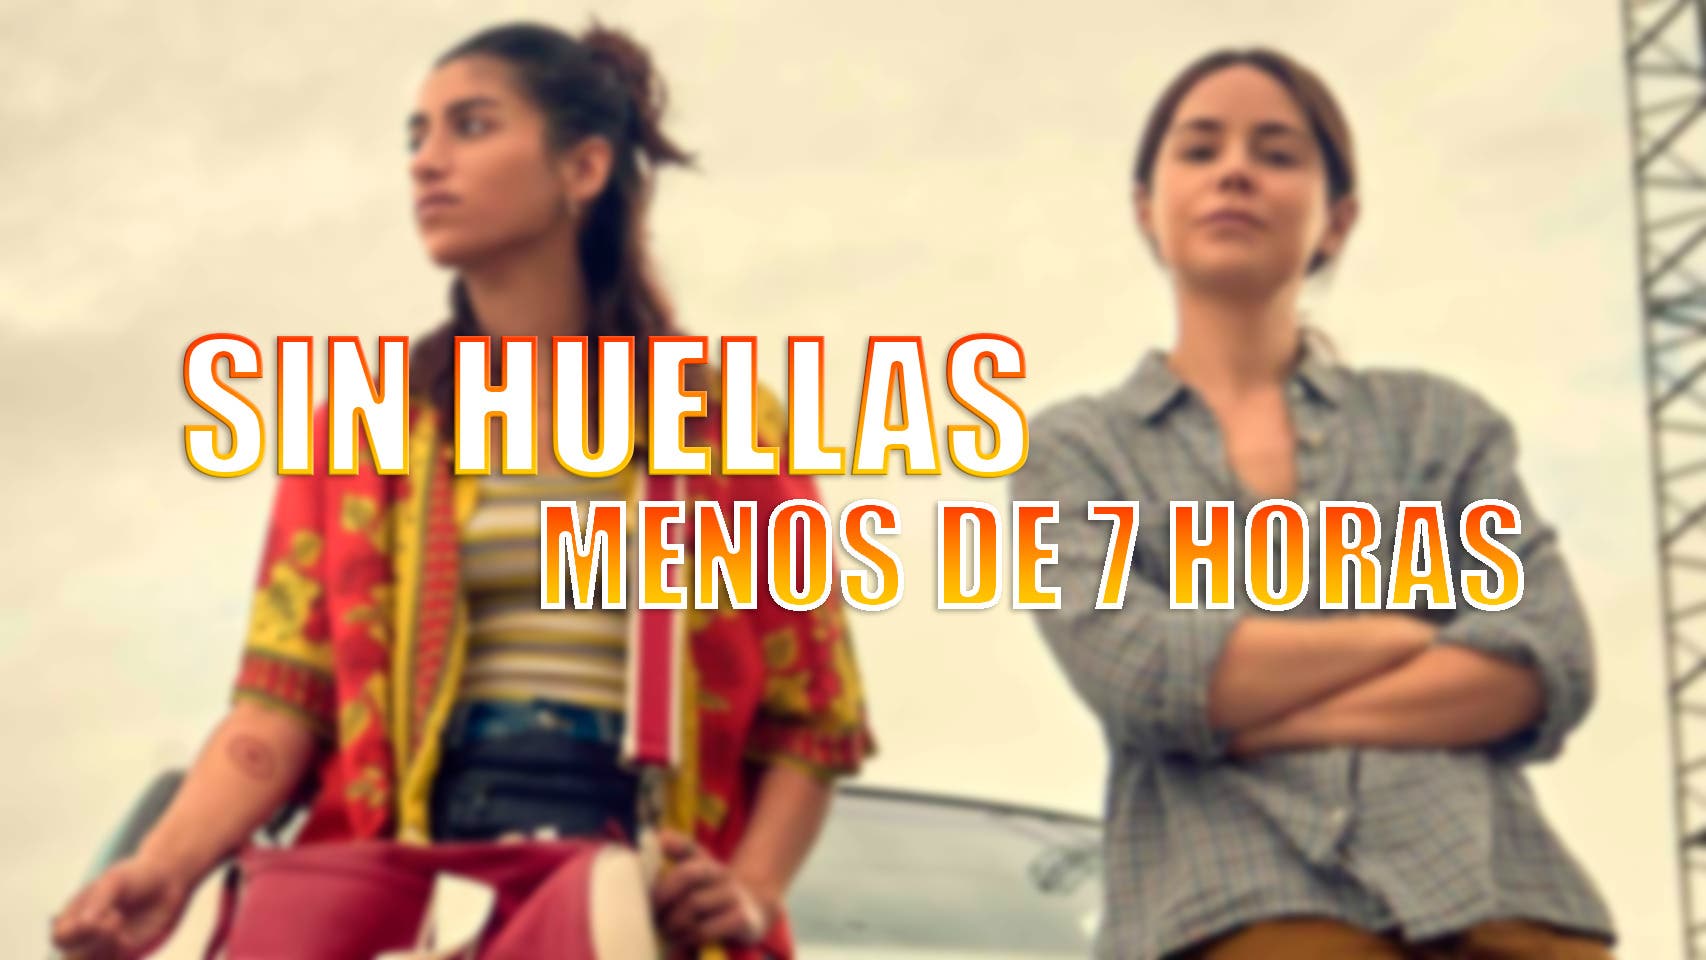 Sin huellas lasts less than 7 minutes and is one of the most successful Spanish series on Prime Video